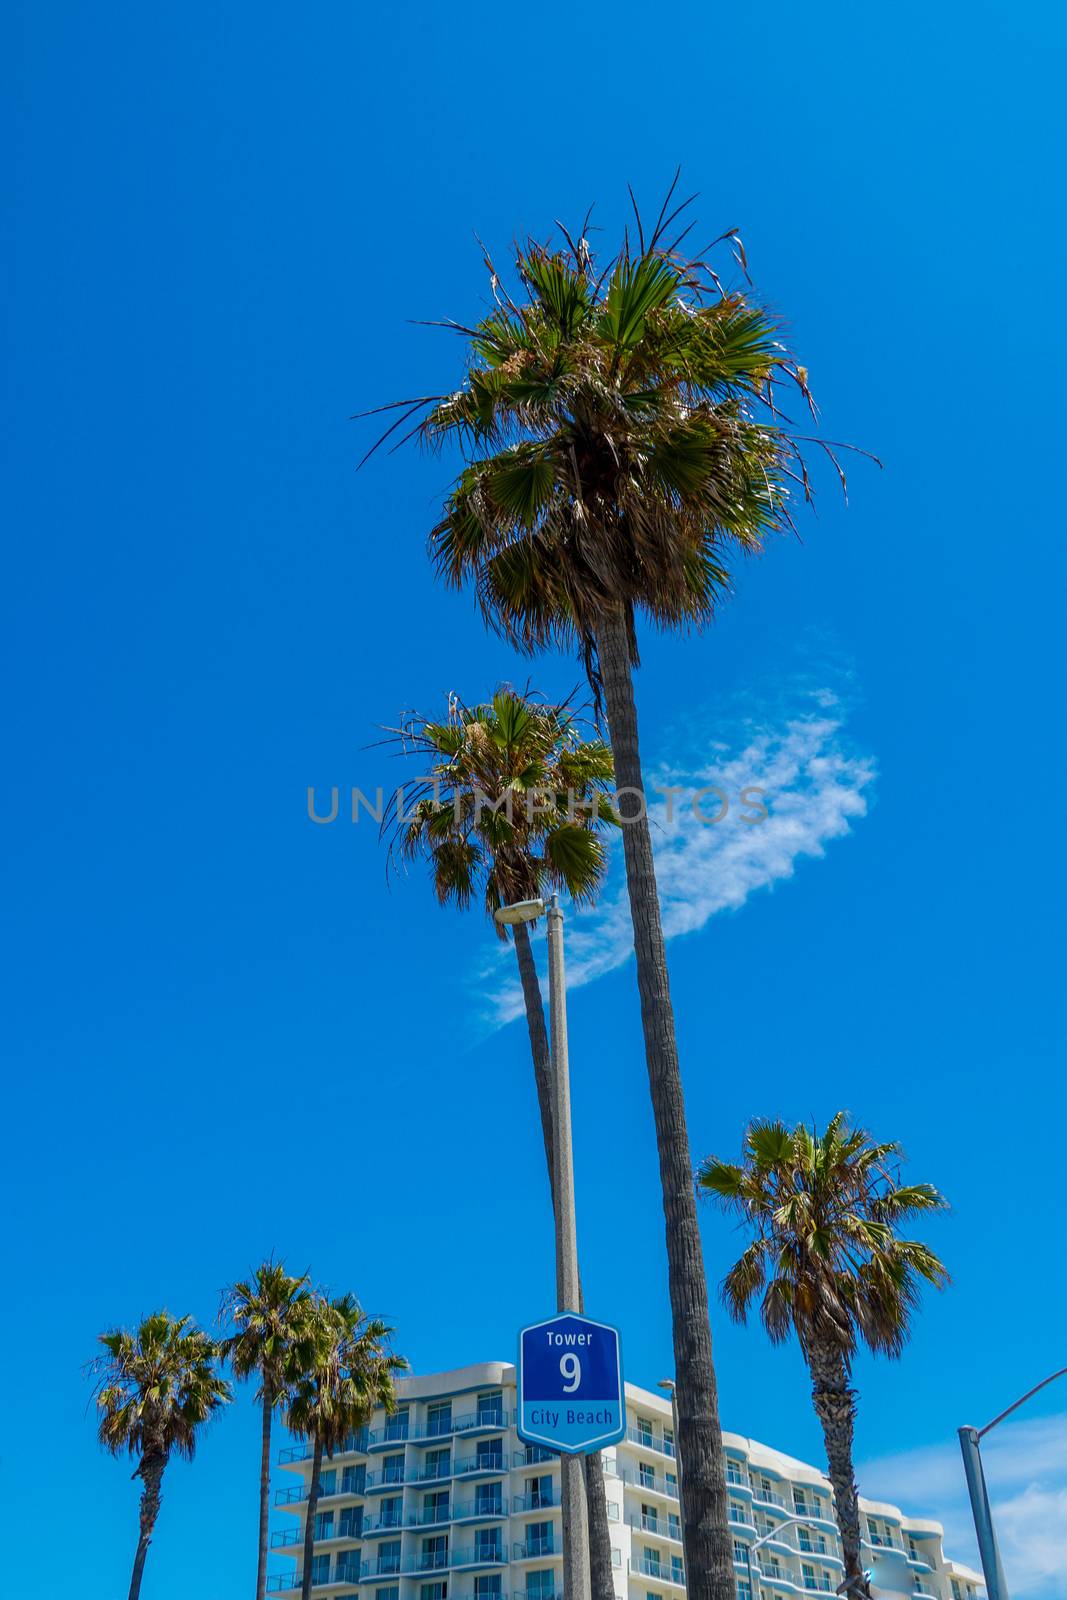 Palm trees with blue sky and building on the background. California, USA